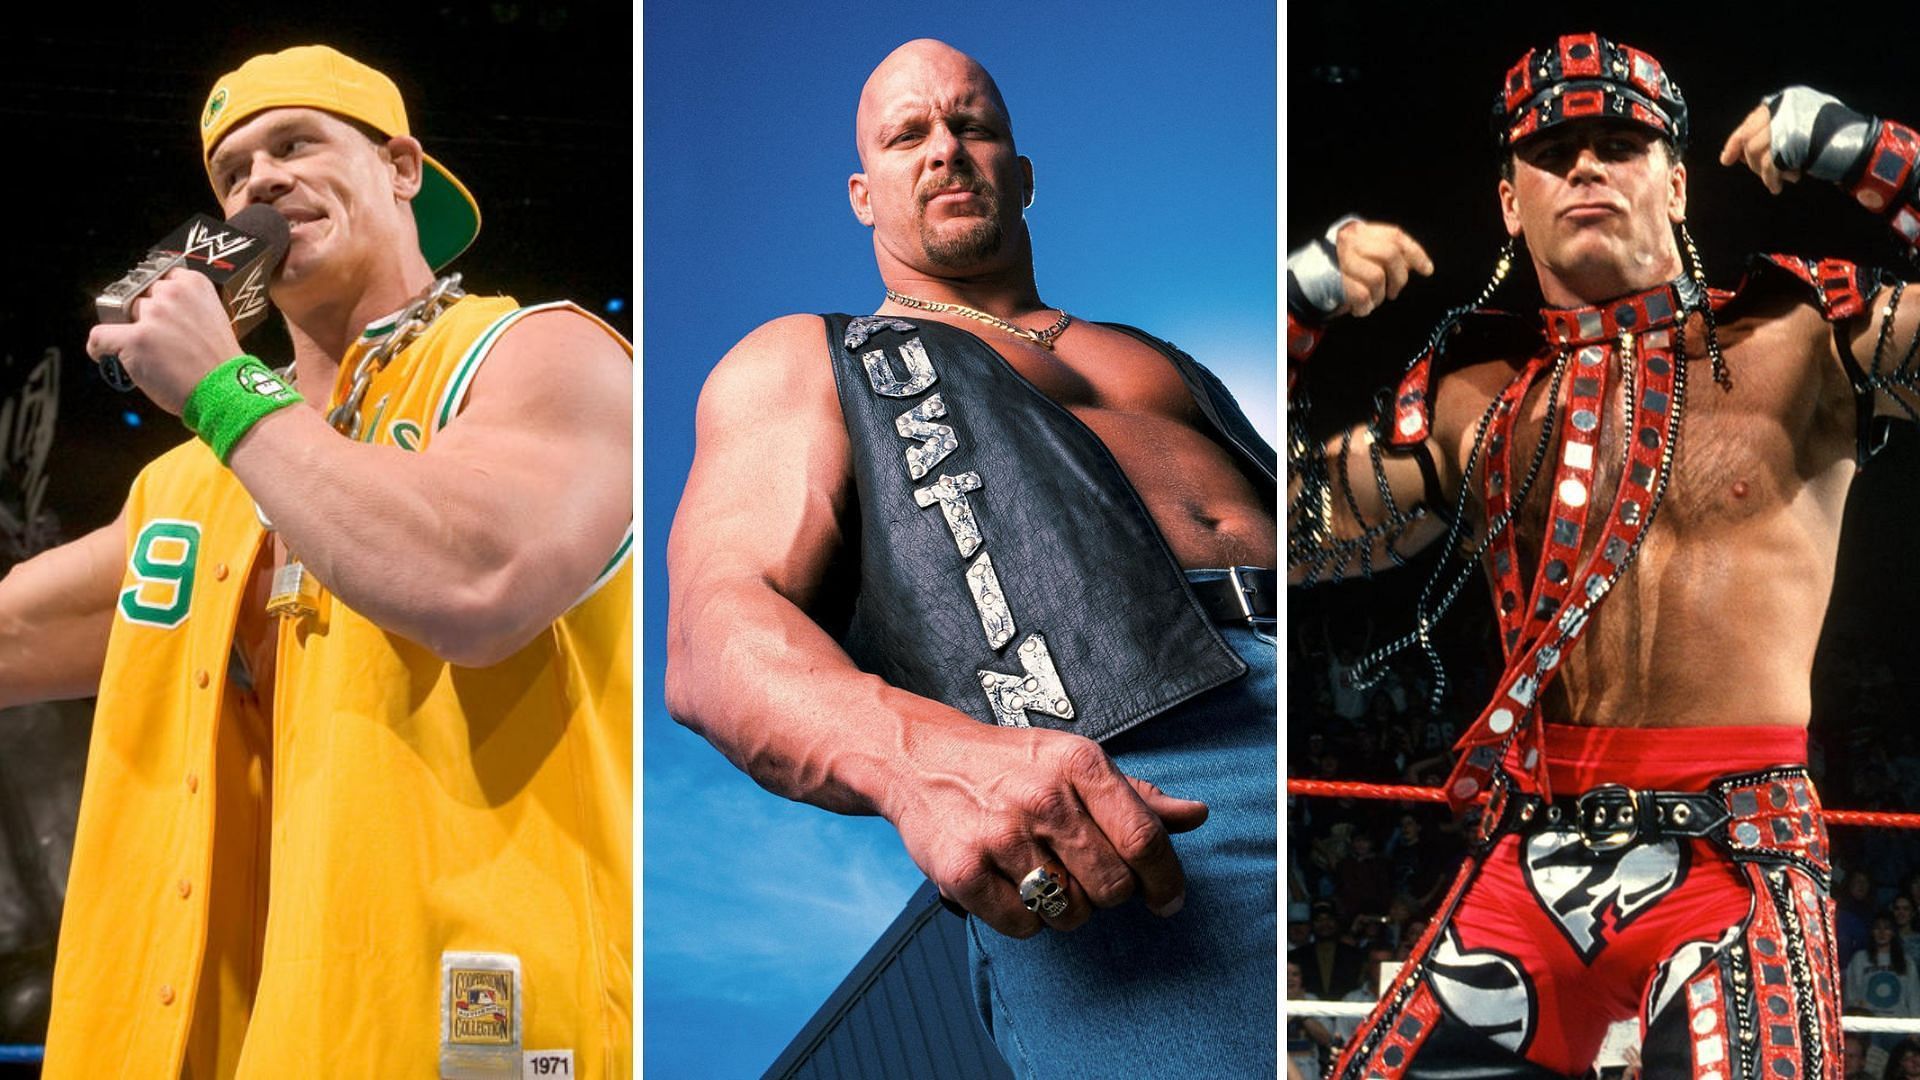 Several WWE legends can lay claim to the title of Mr. Royal Rumble